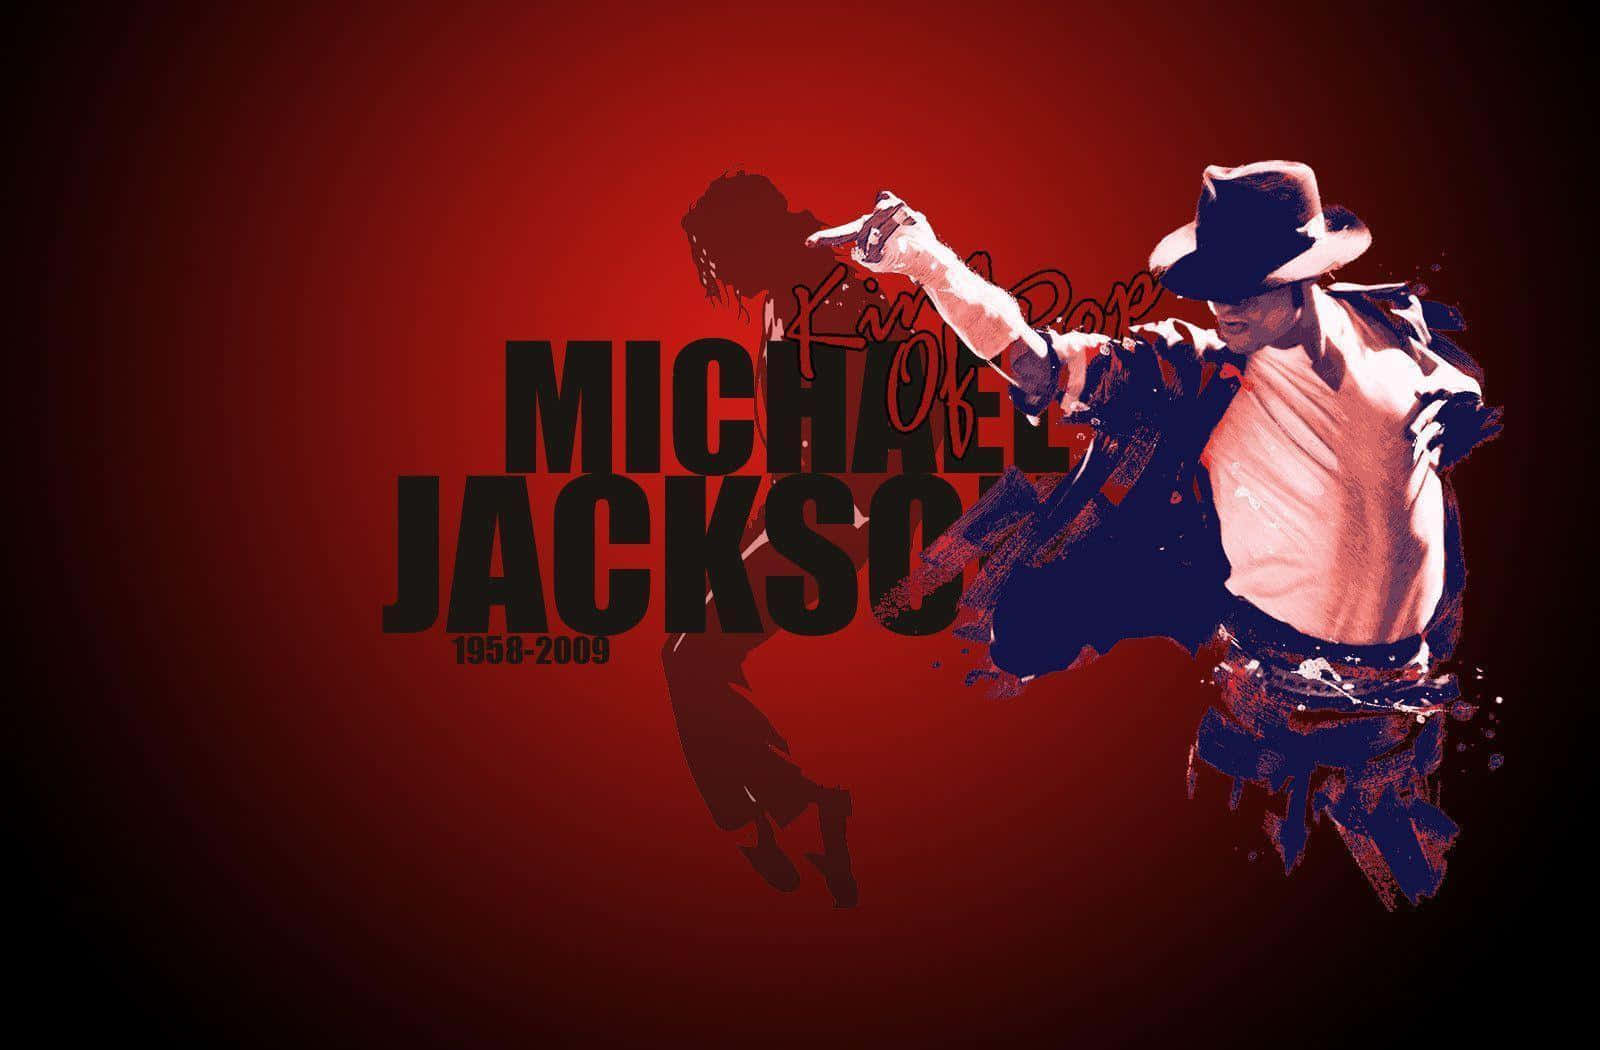 Download high-quality wallpapers of Michael Jackson on your iPhone! Wallpaper